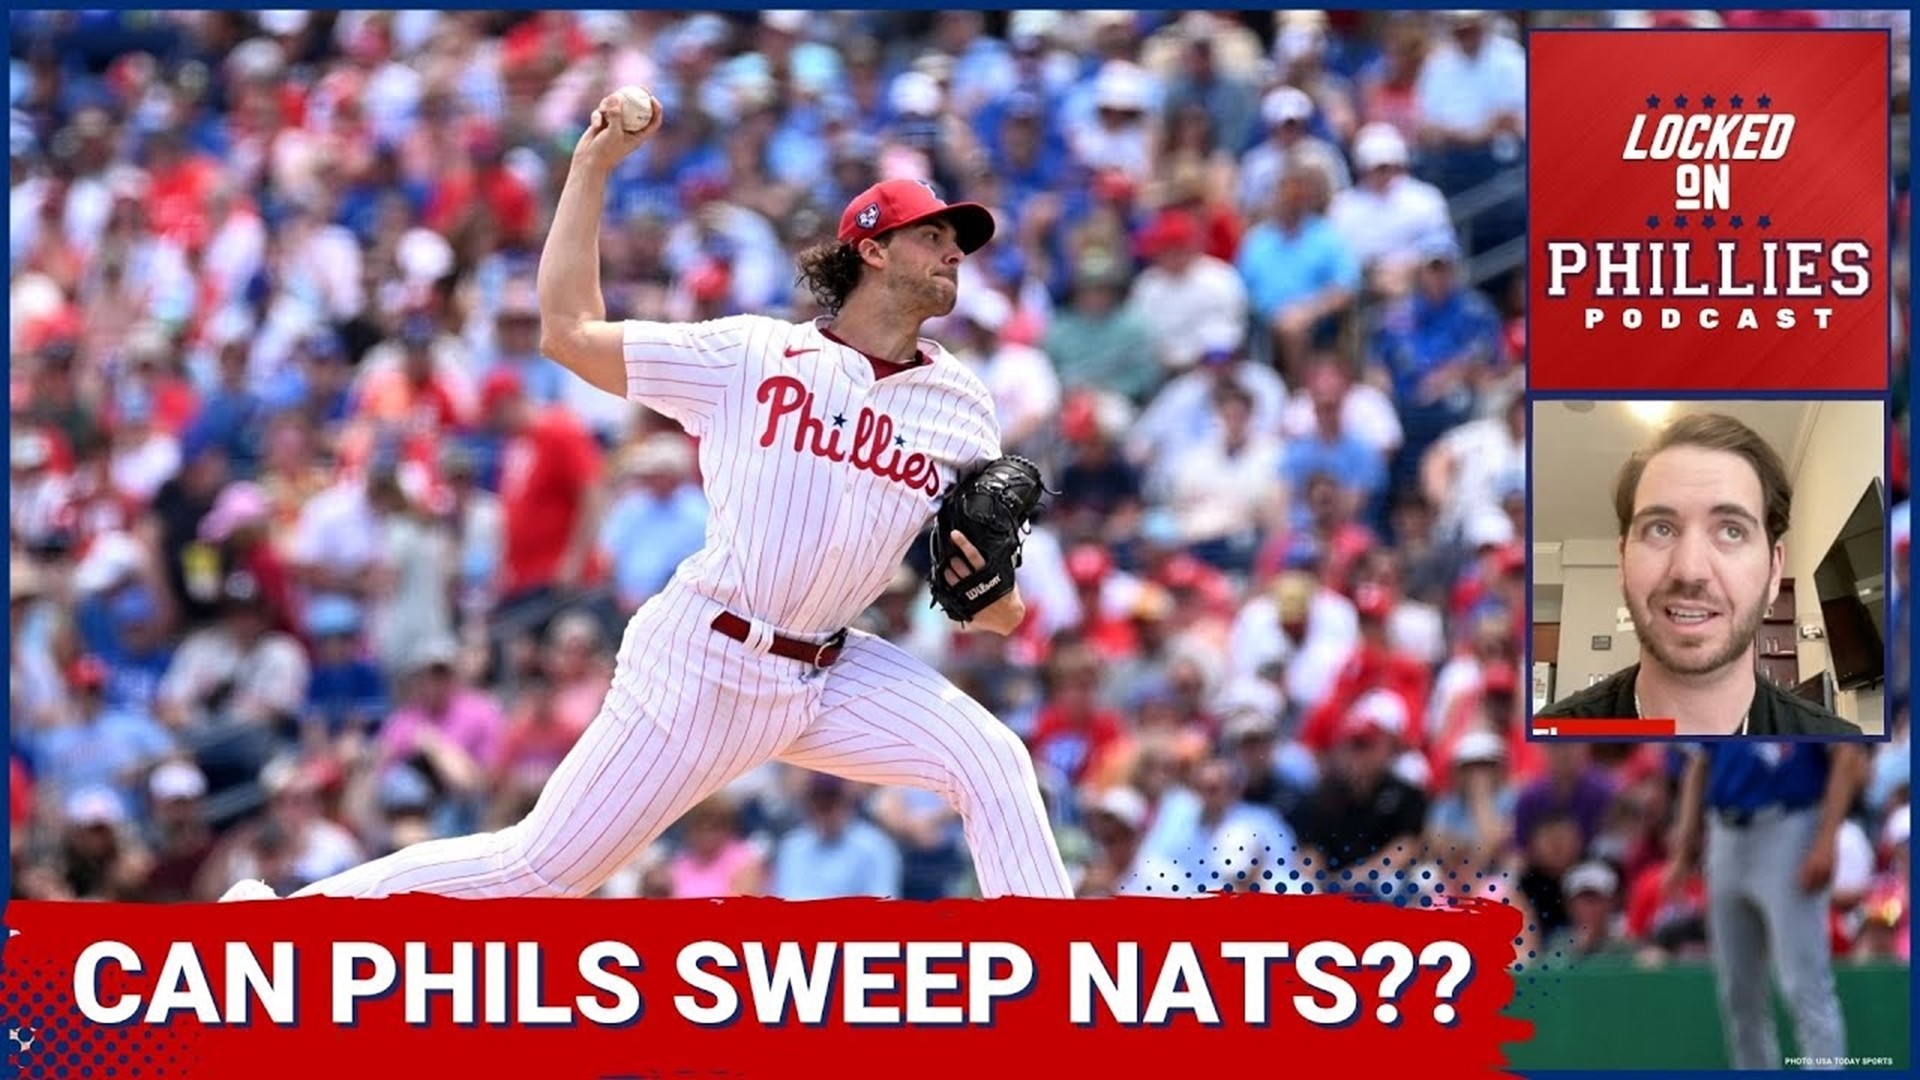 In today's episode, Connor explains why he thinks the Philadelphia Phillies have a good chance to sweep the Washington Nationals this weekend.